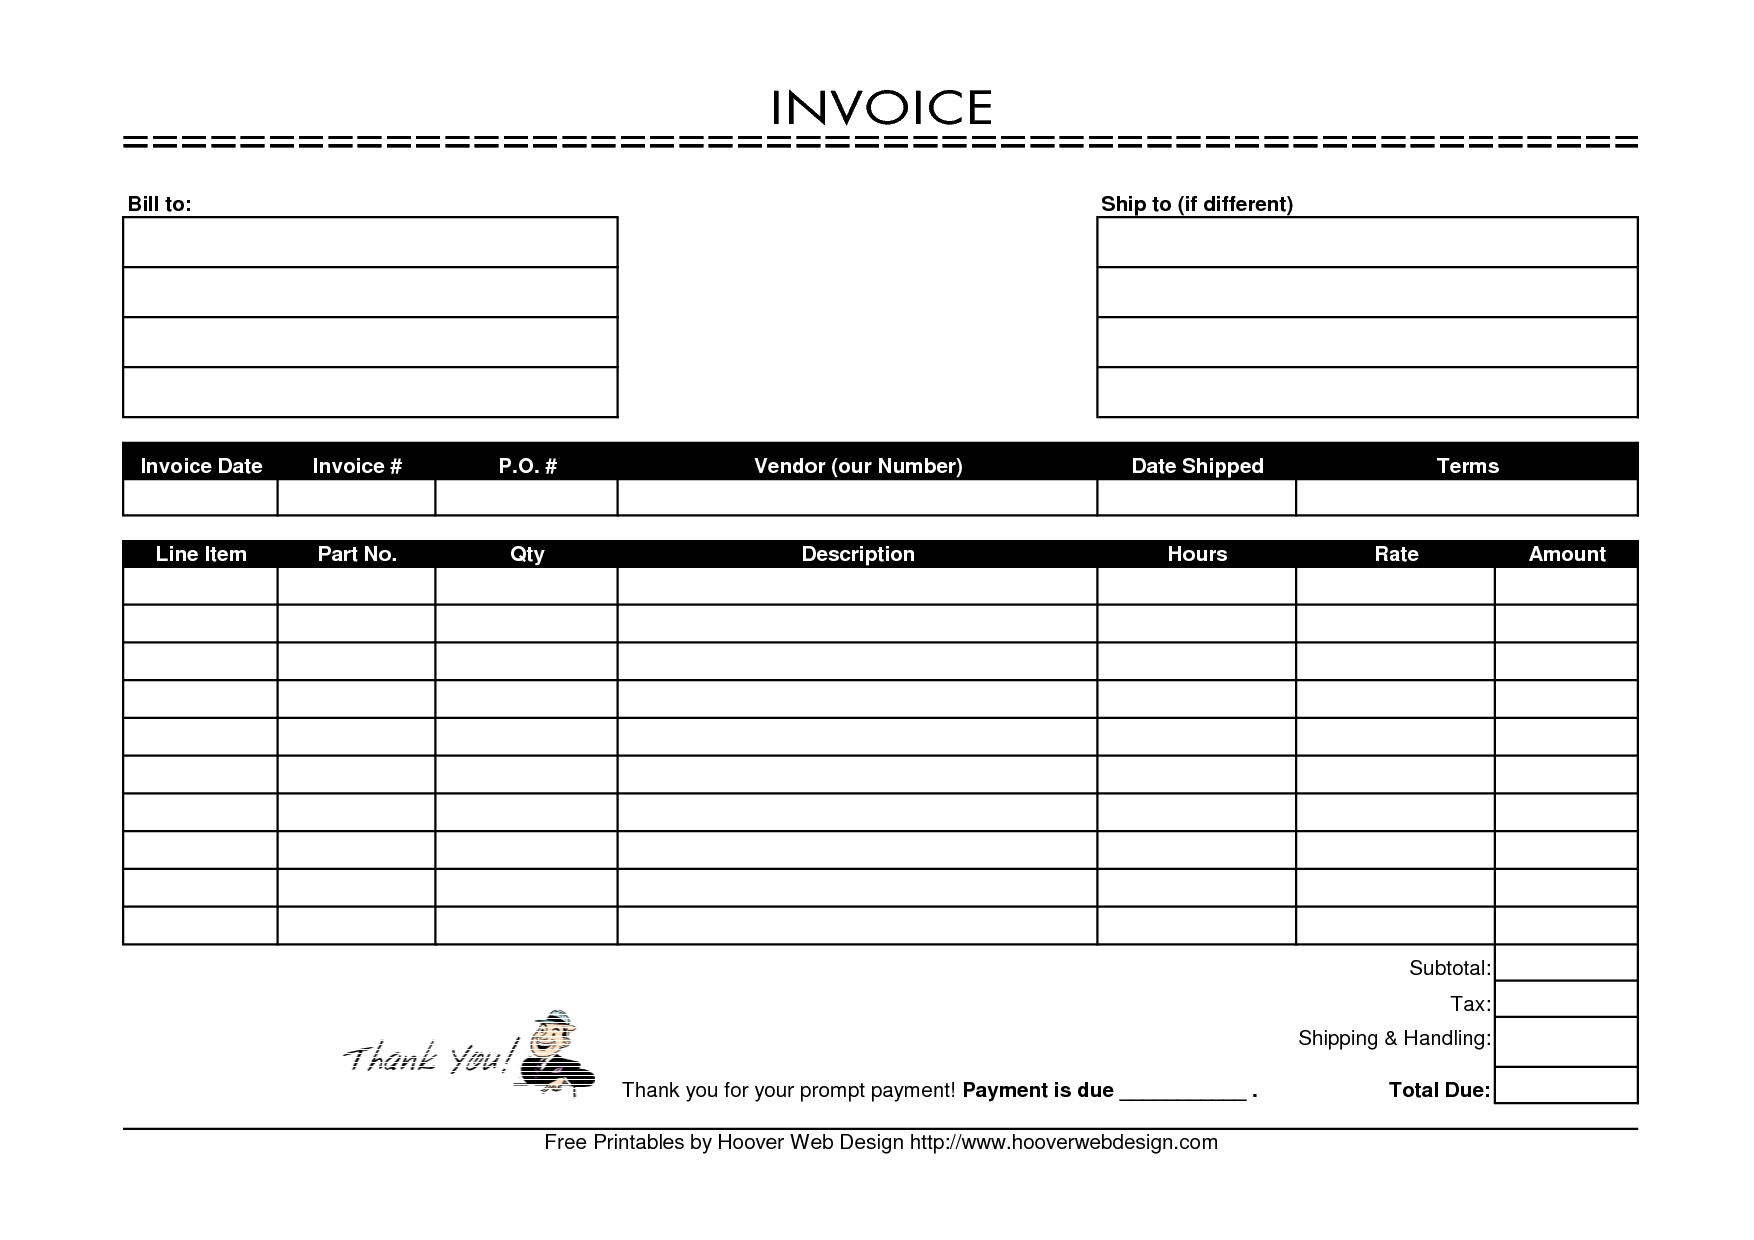 9 examples of printable invoice template and steps to create printable invoices online